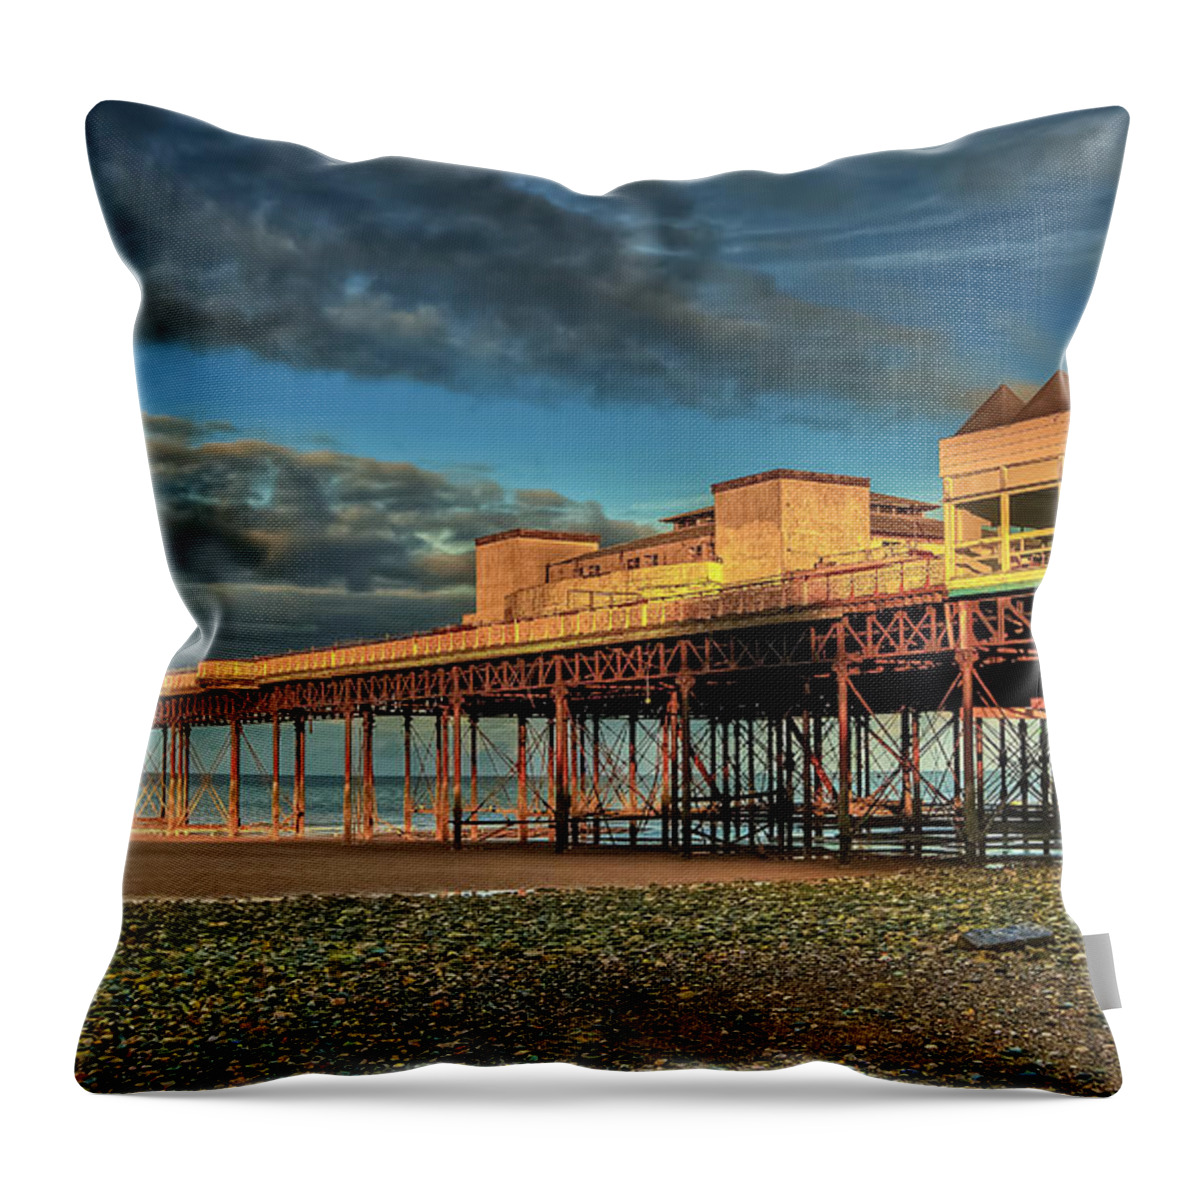 Victoria Pier Throw Pillow featuring the photograph Victoria Pier 1899 by Adrian Evans